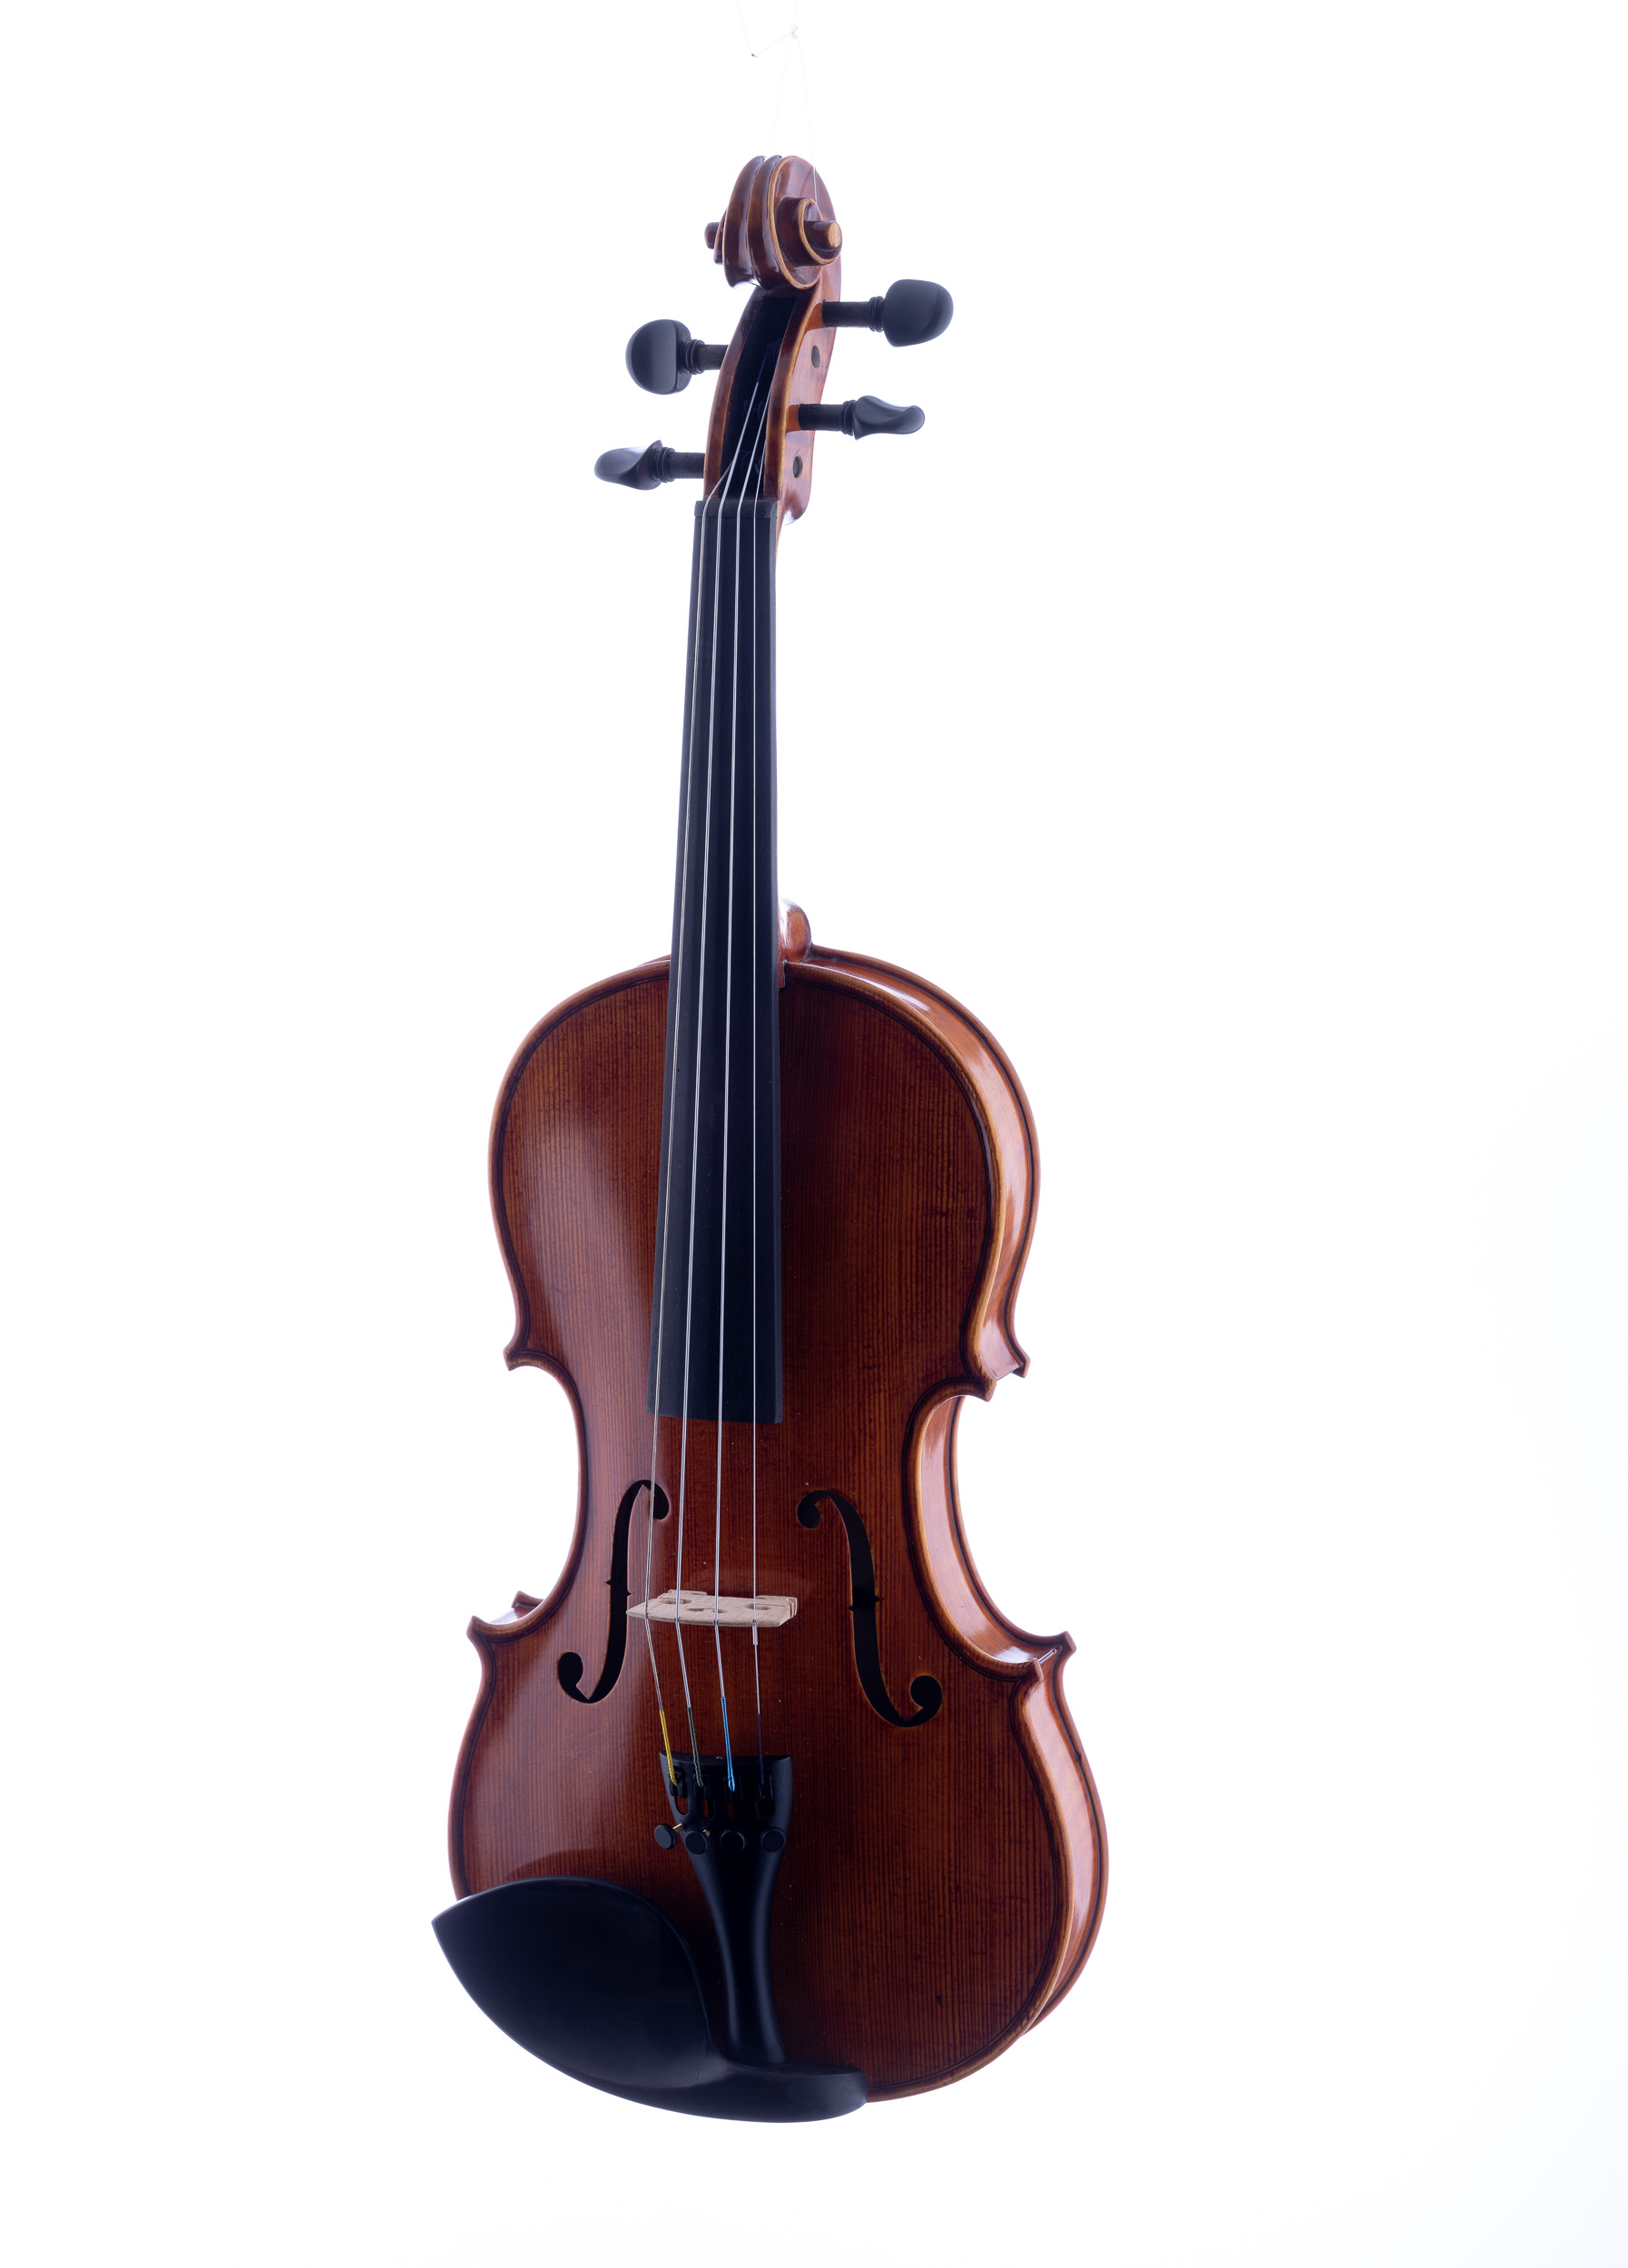 String Instruments buy from schagerl.com